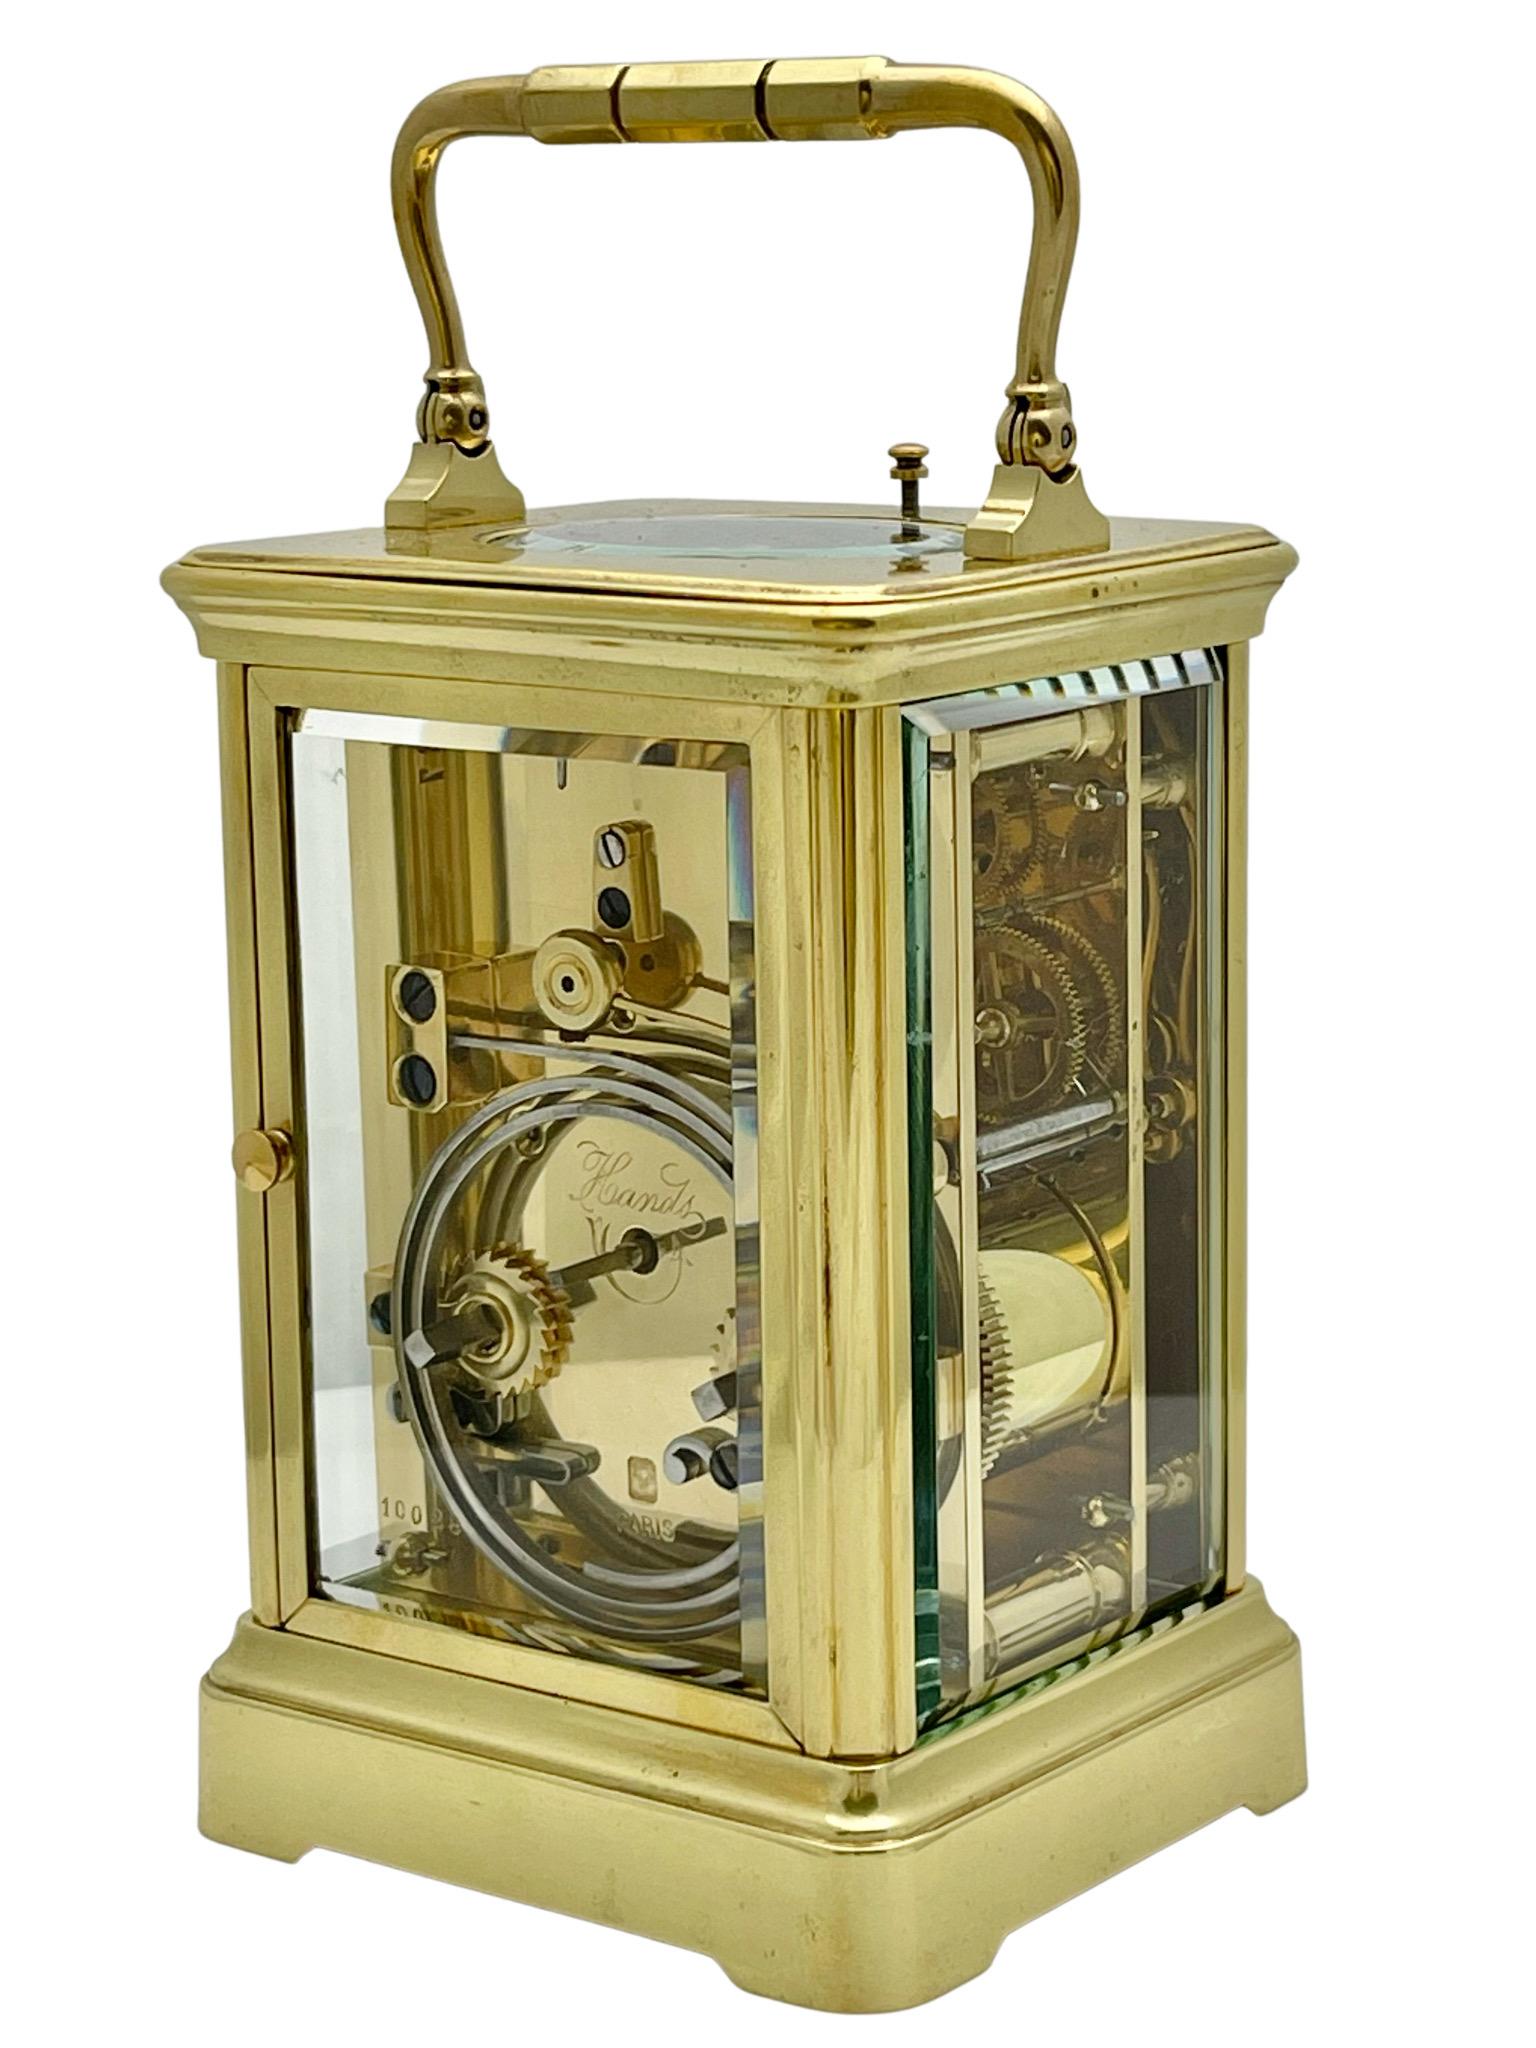 Glazed Antique French Striking and Repeating Polished Brass Henri Jacot Carriage Clock For Sale